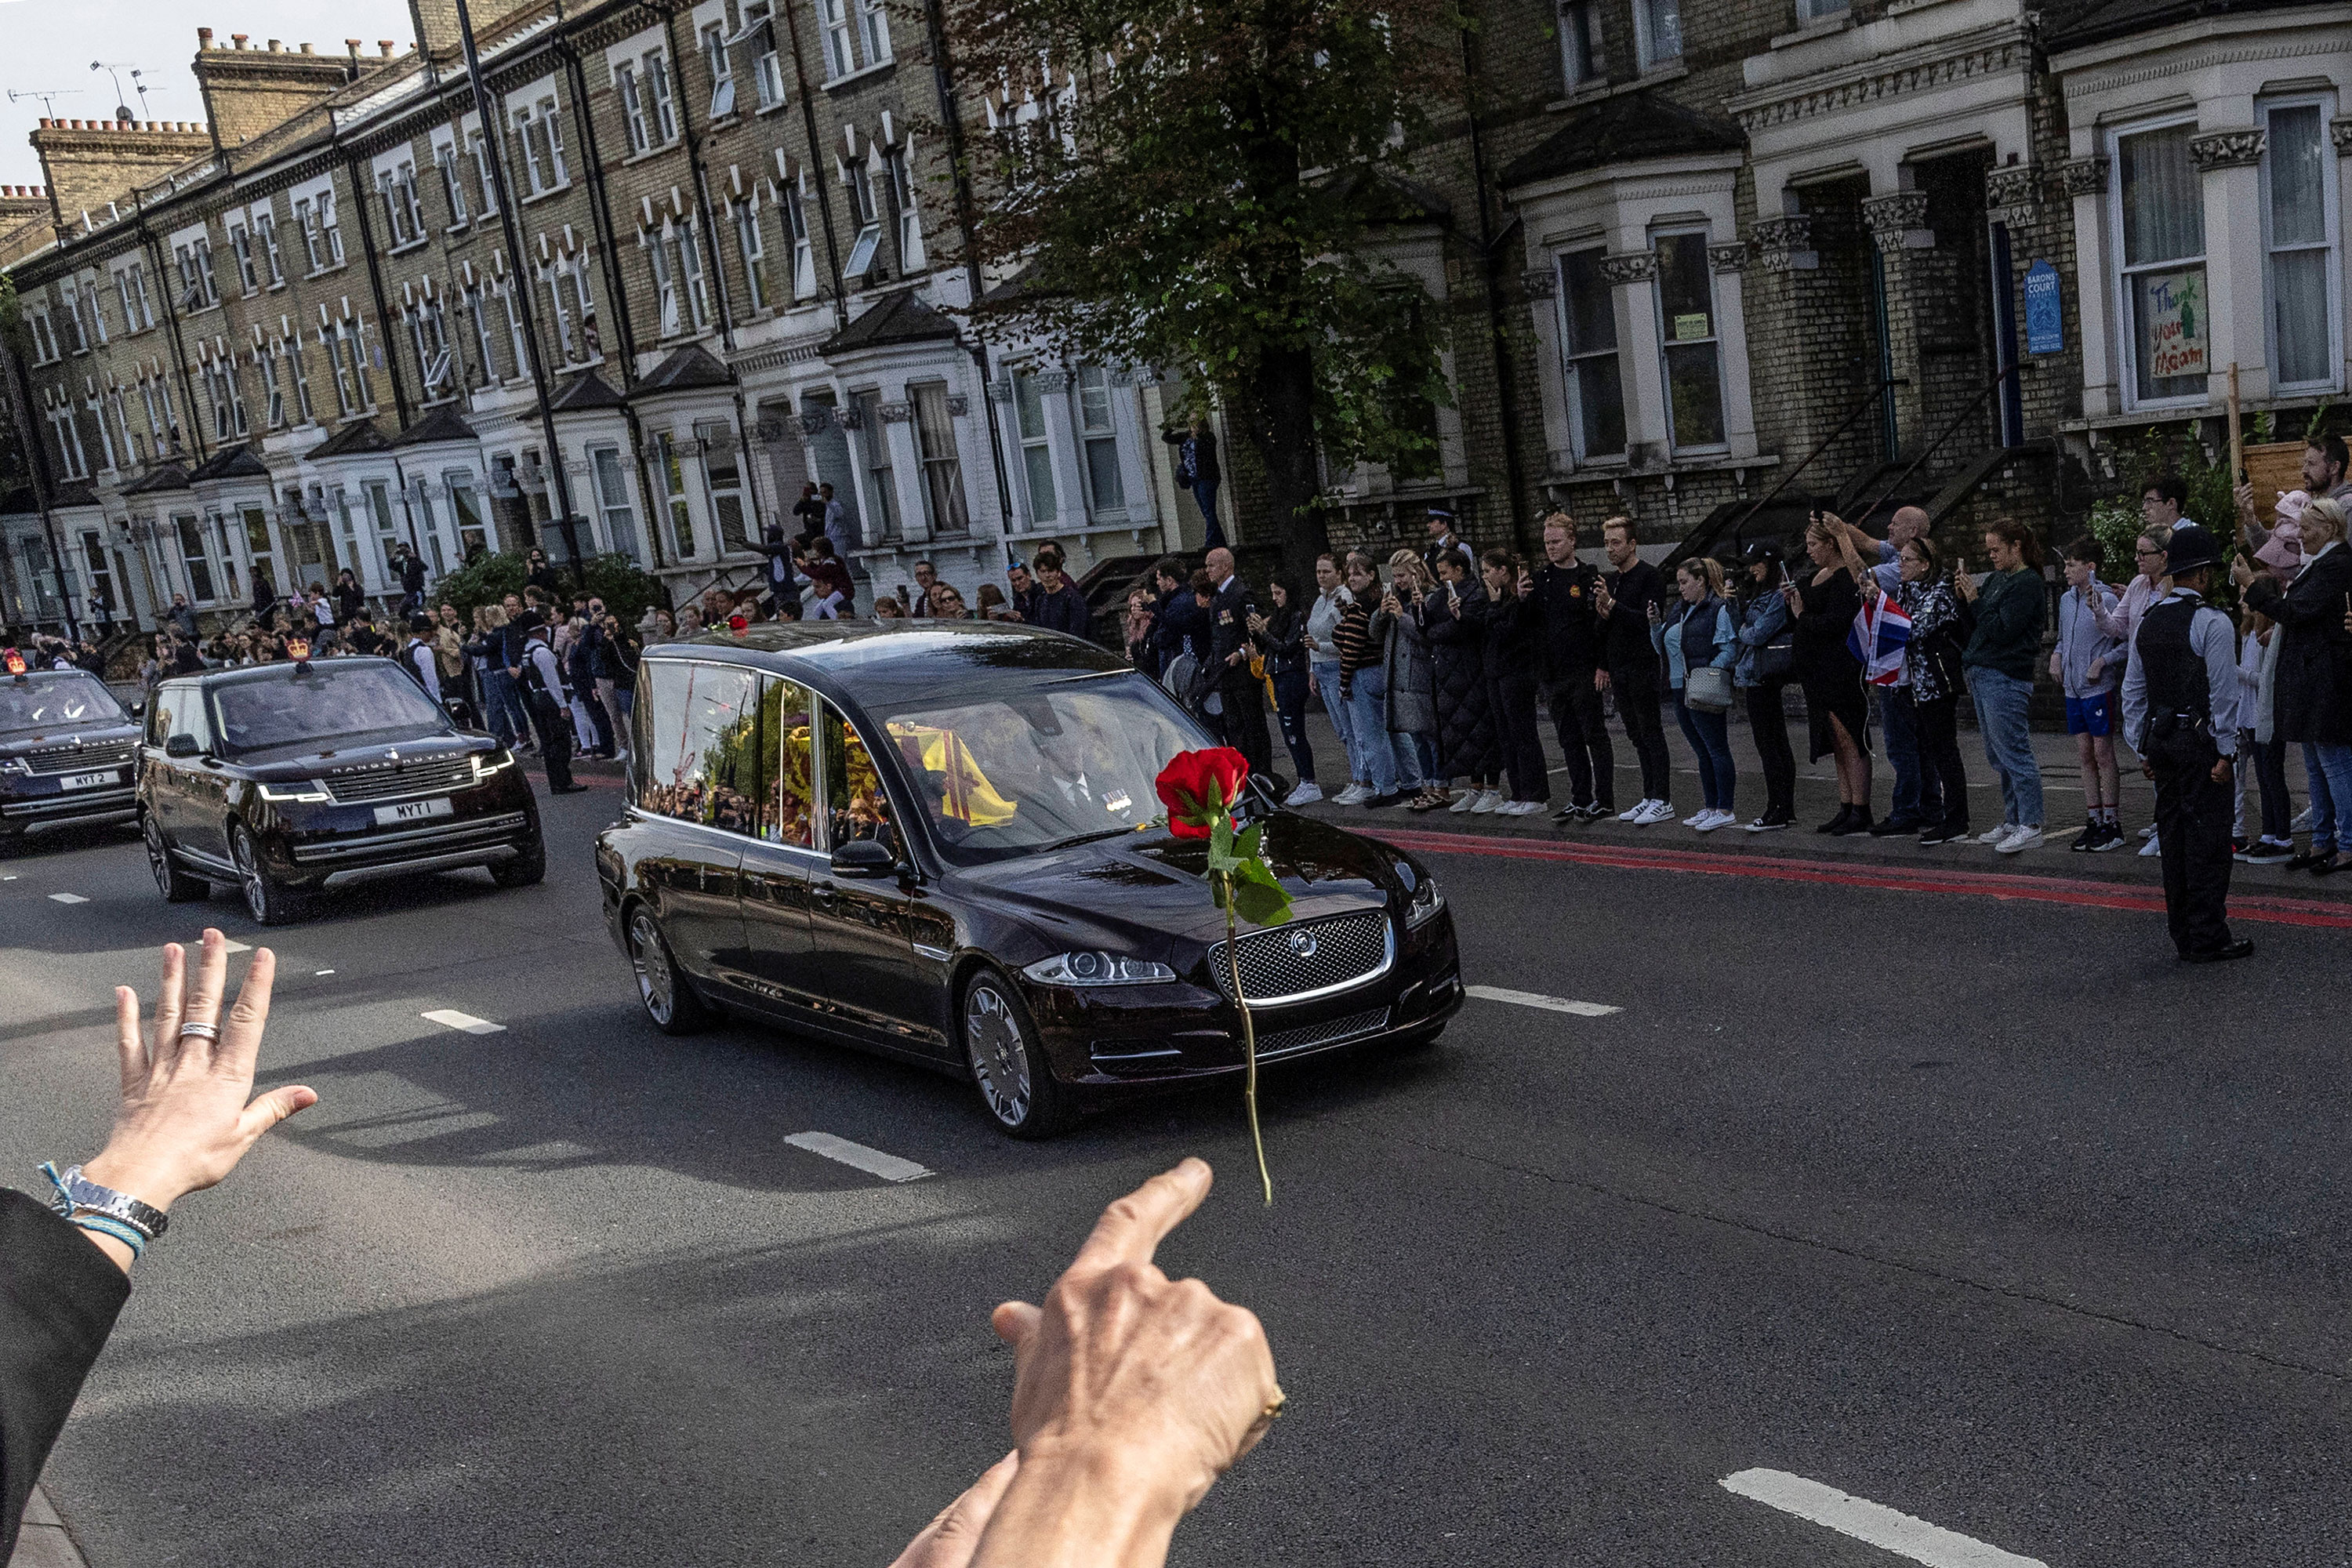 A person throws a flower towards the Queen's hearse in west London.